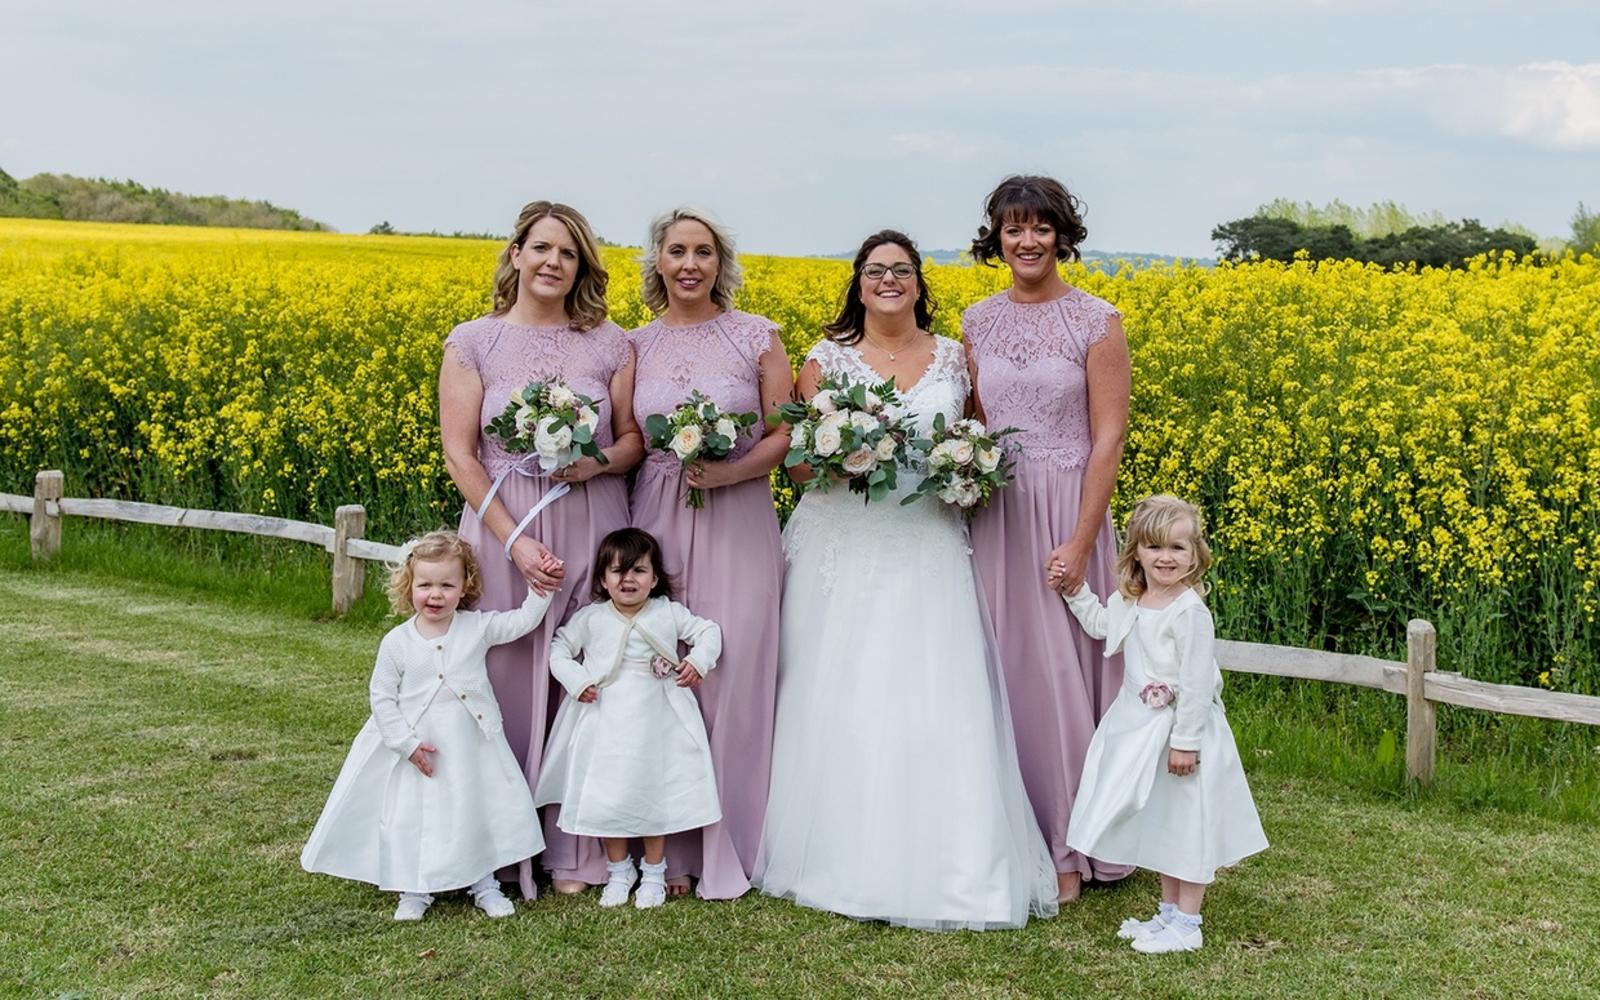 Capture Every Moment wedding photography duo from Cirencester reportage and traditional photographers Lapstone Barn Chipping Campden Cotswolds venue bridal party dusky pink bridesmaid dressed flower girls 